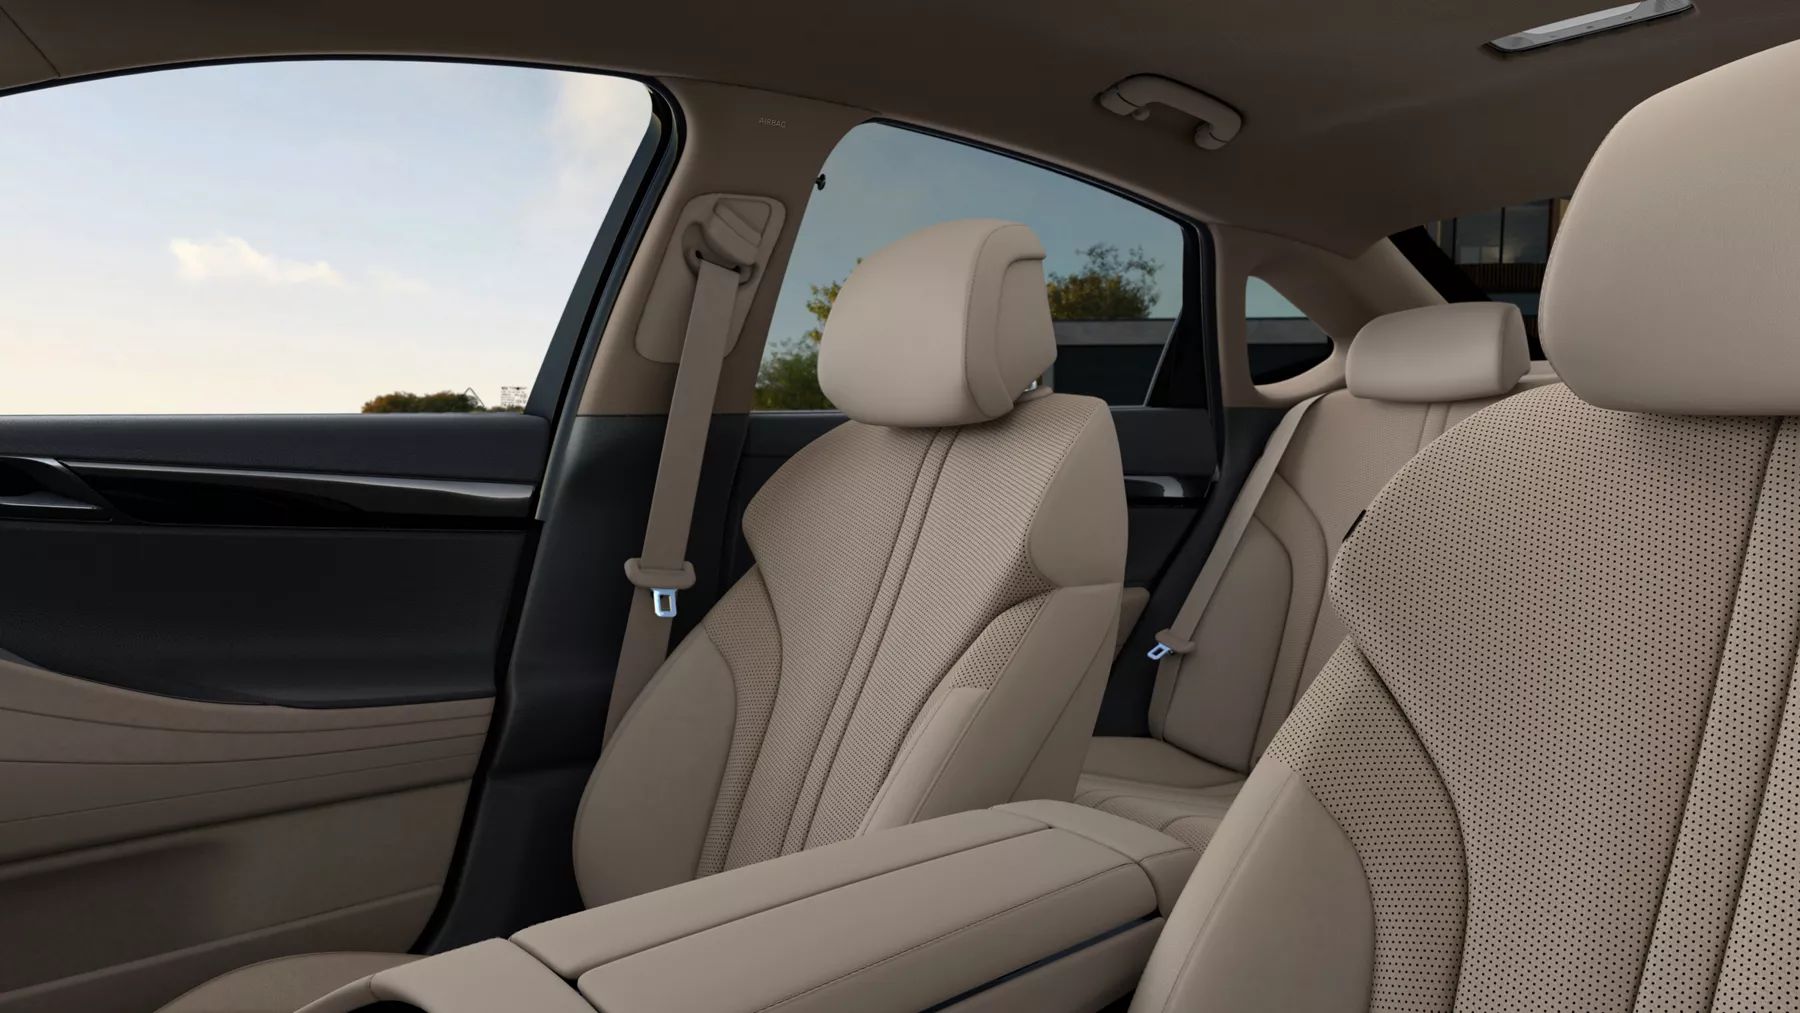 G80 front seats in beige color.